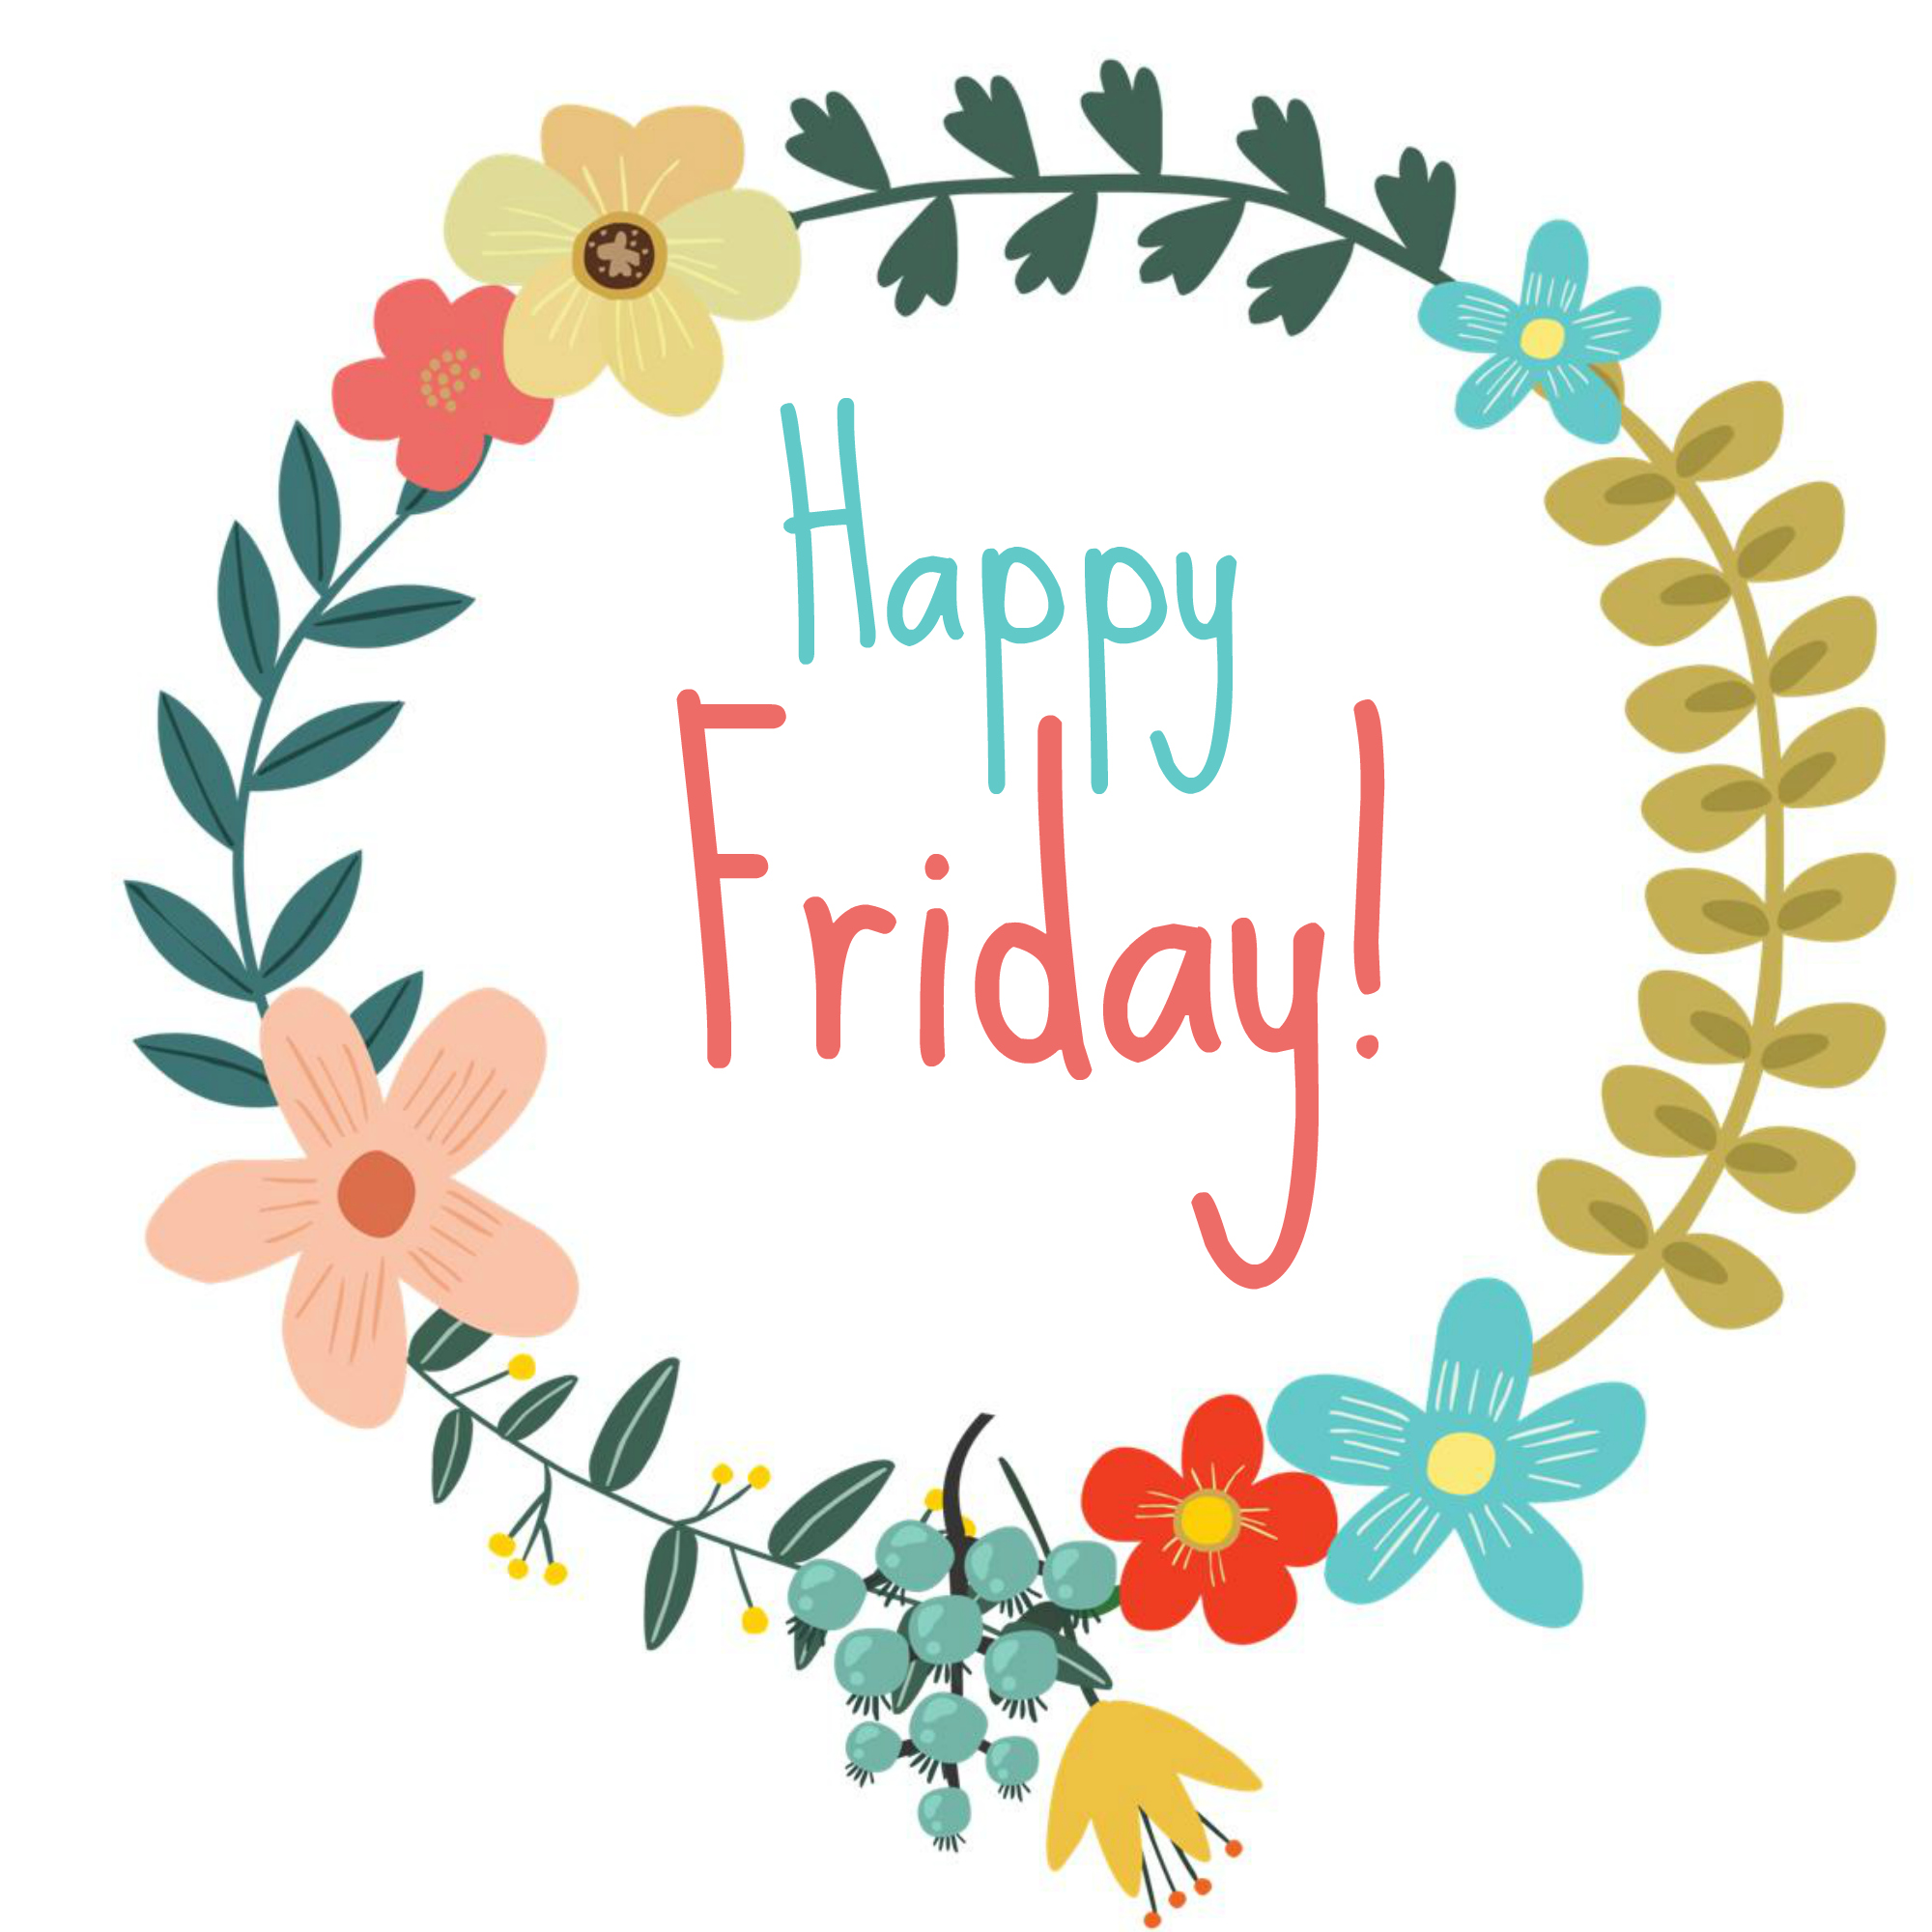 Happy Friday Clip Art Free @ Happyfridayimages.com - Clip Art Library